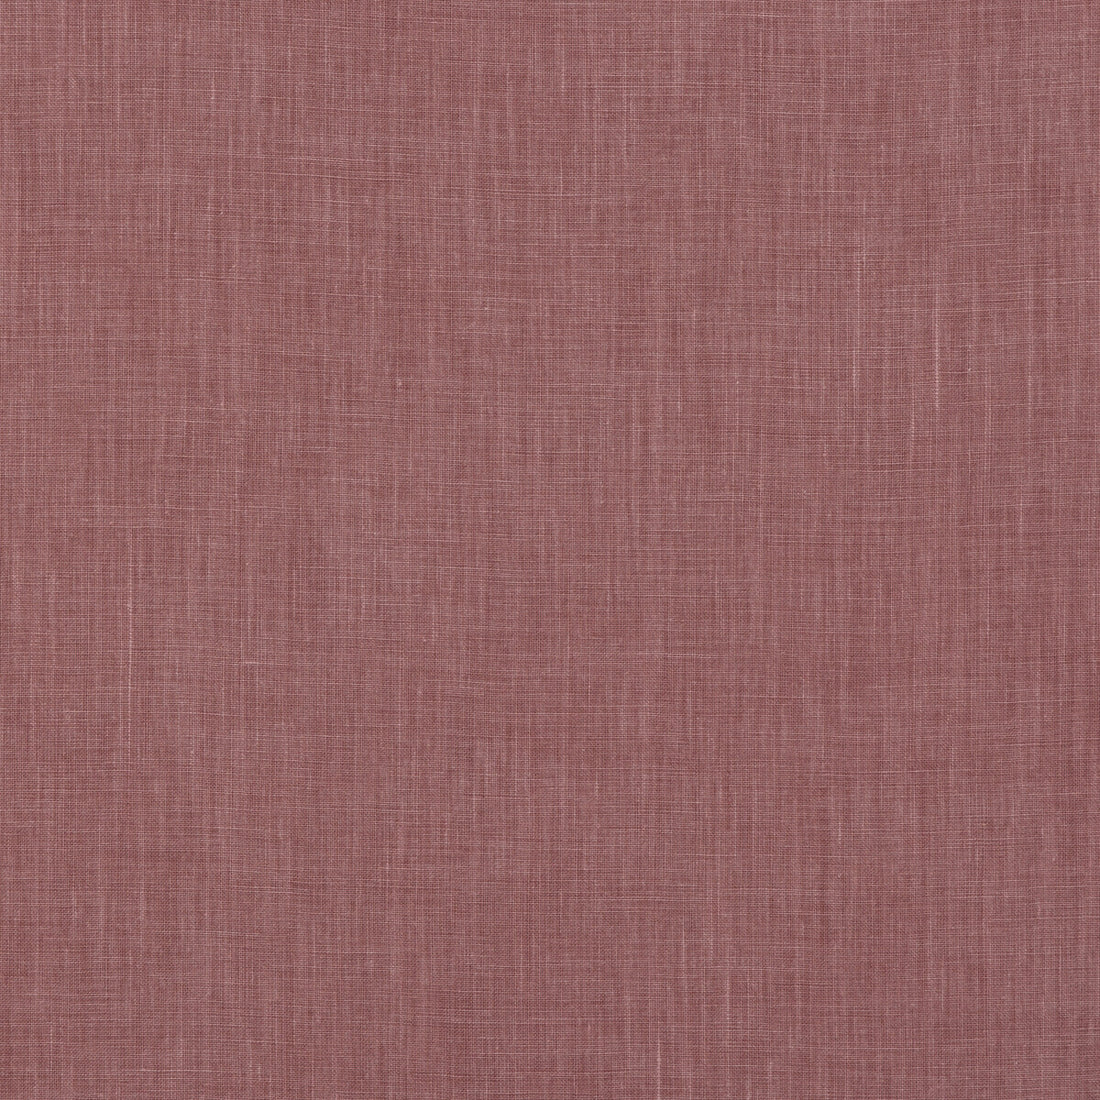 Kravet Basics fabric in 33767-77 color - pattern 33767.77.0 - by Kravet Basics in the Perfect Plains collection